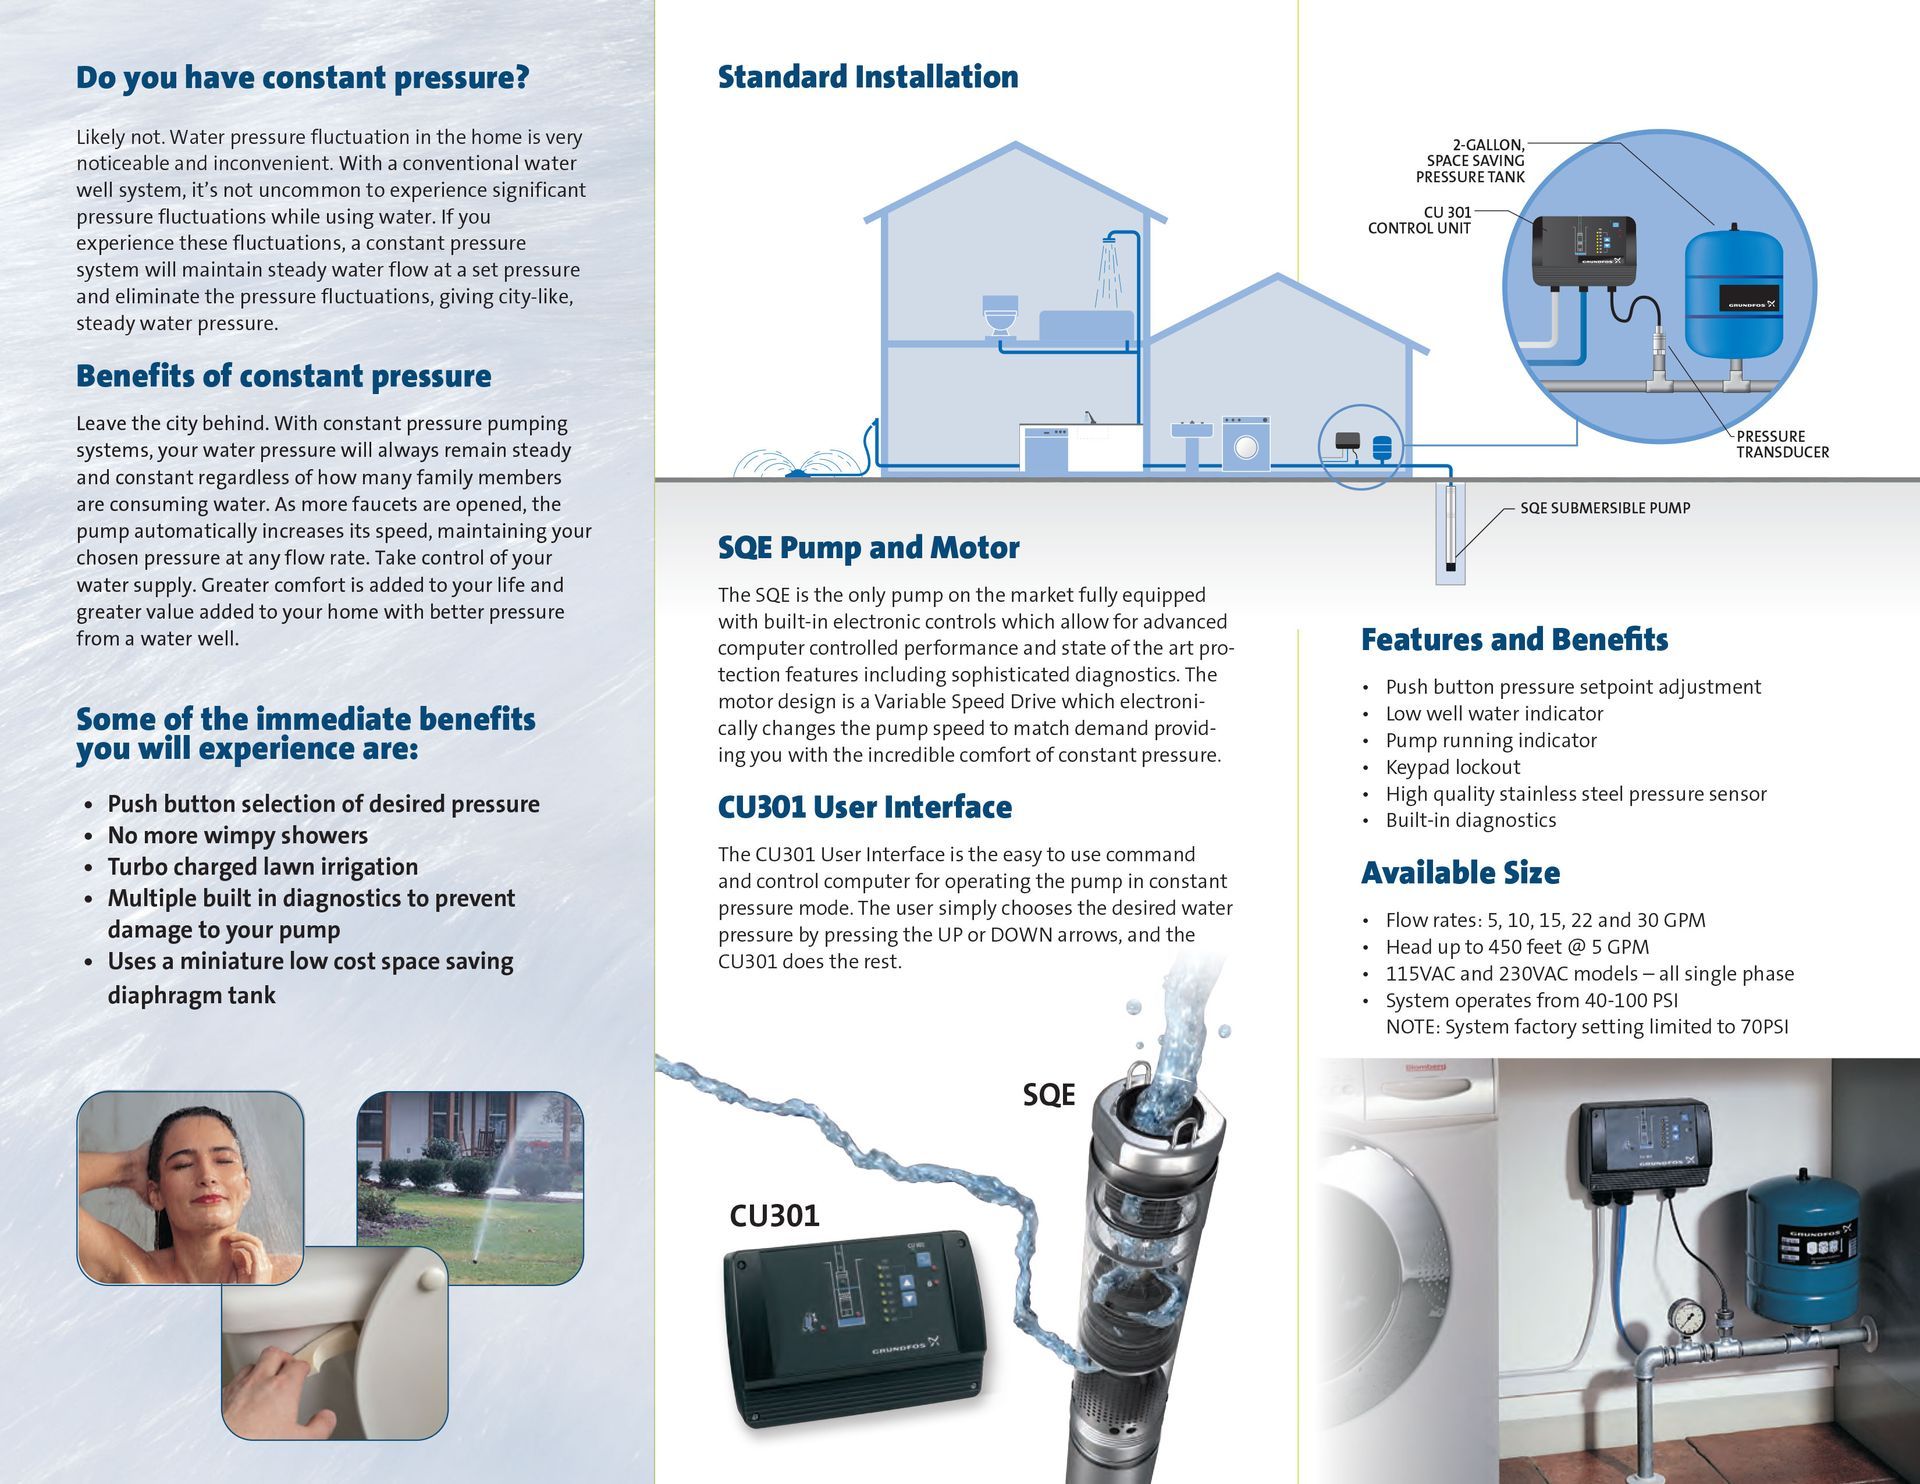 Grundfos SQE Feature and Benefits